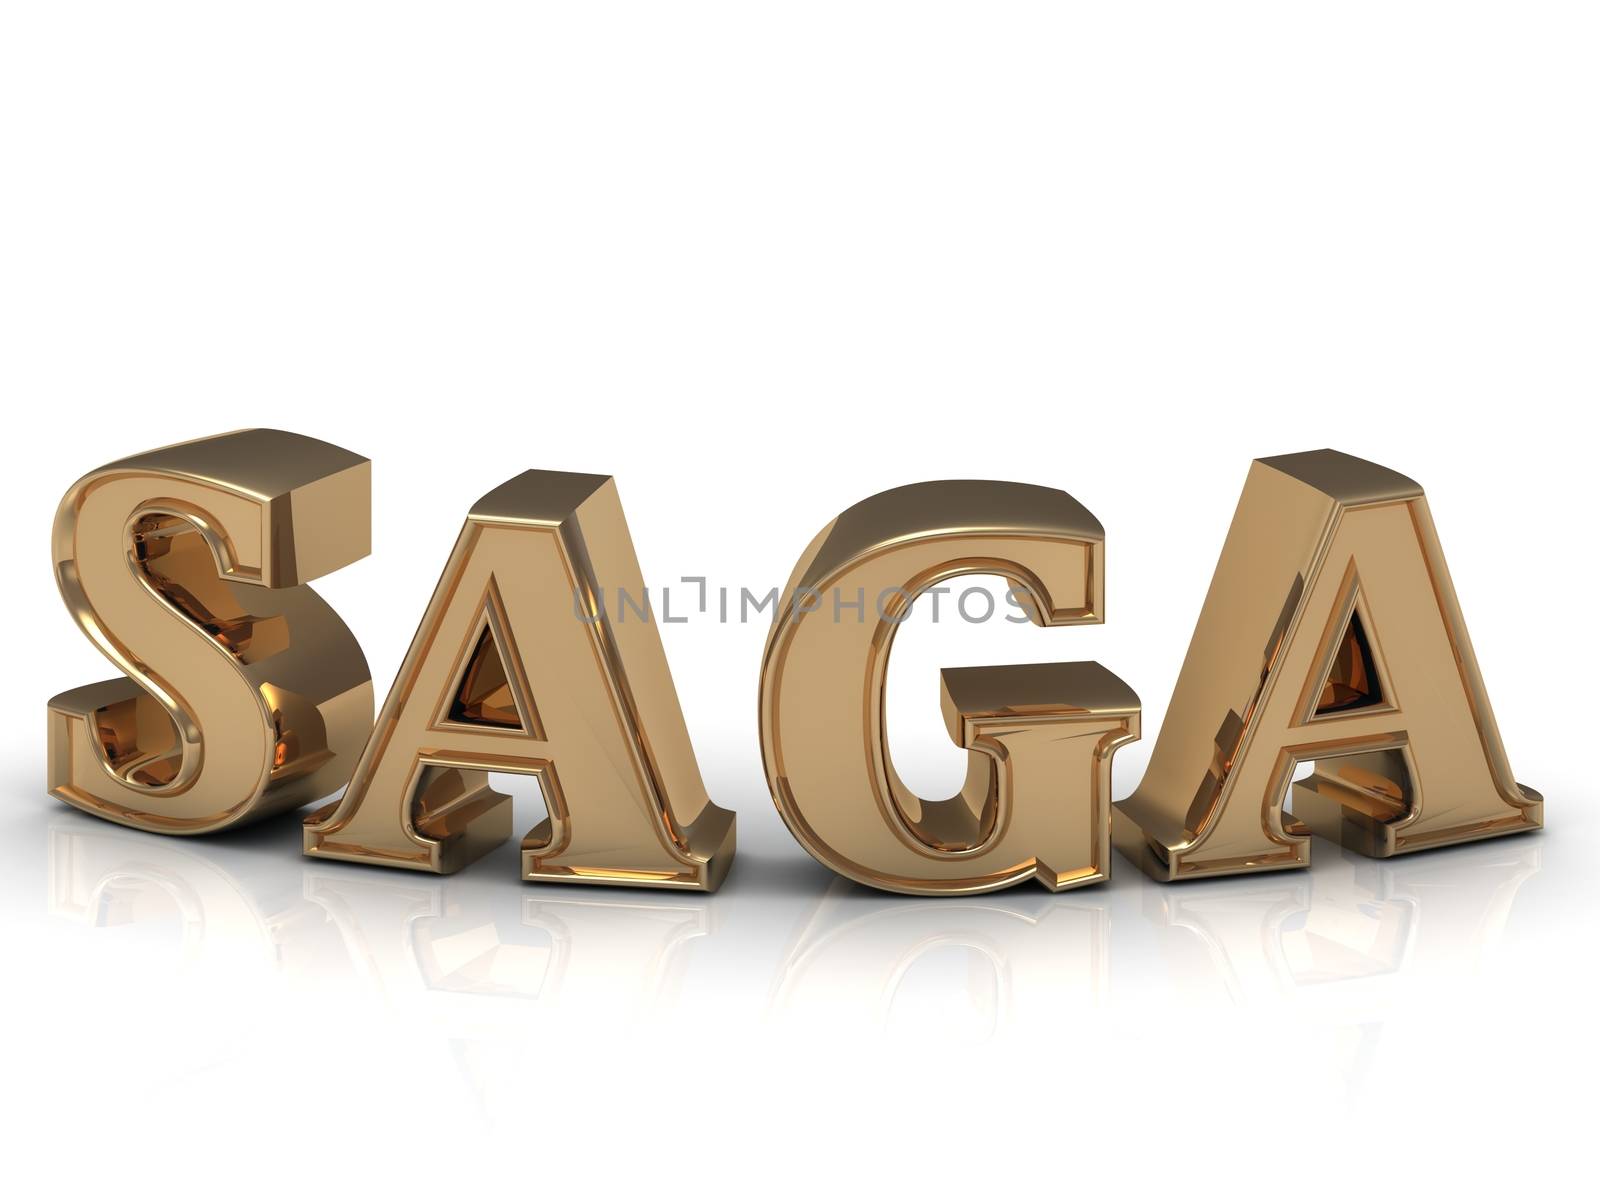 SAGA - bright gold bend letters on a white background